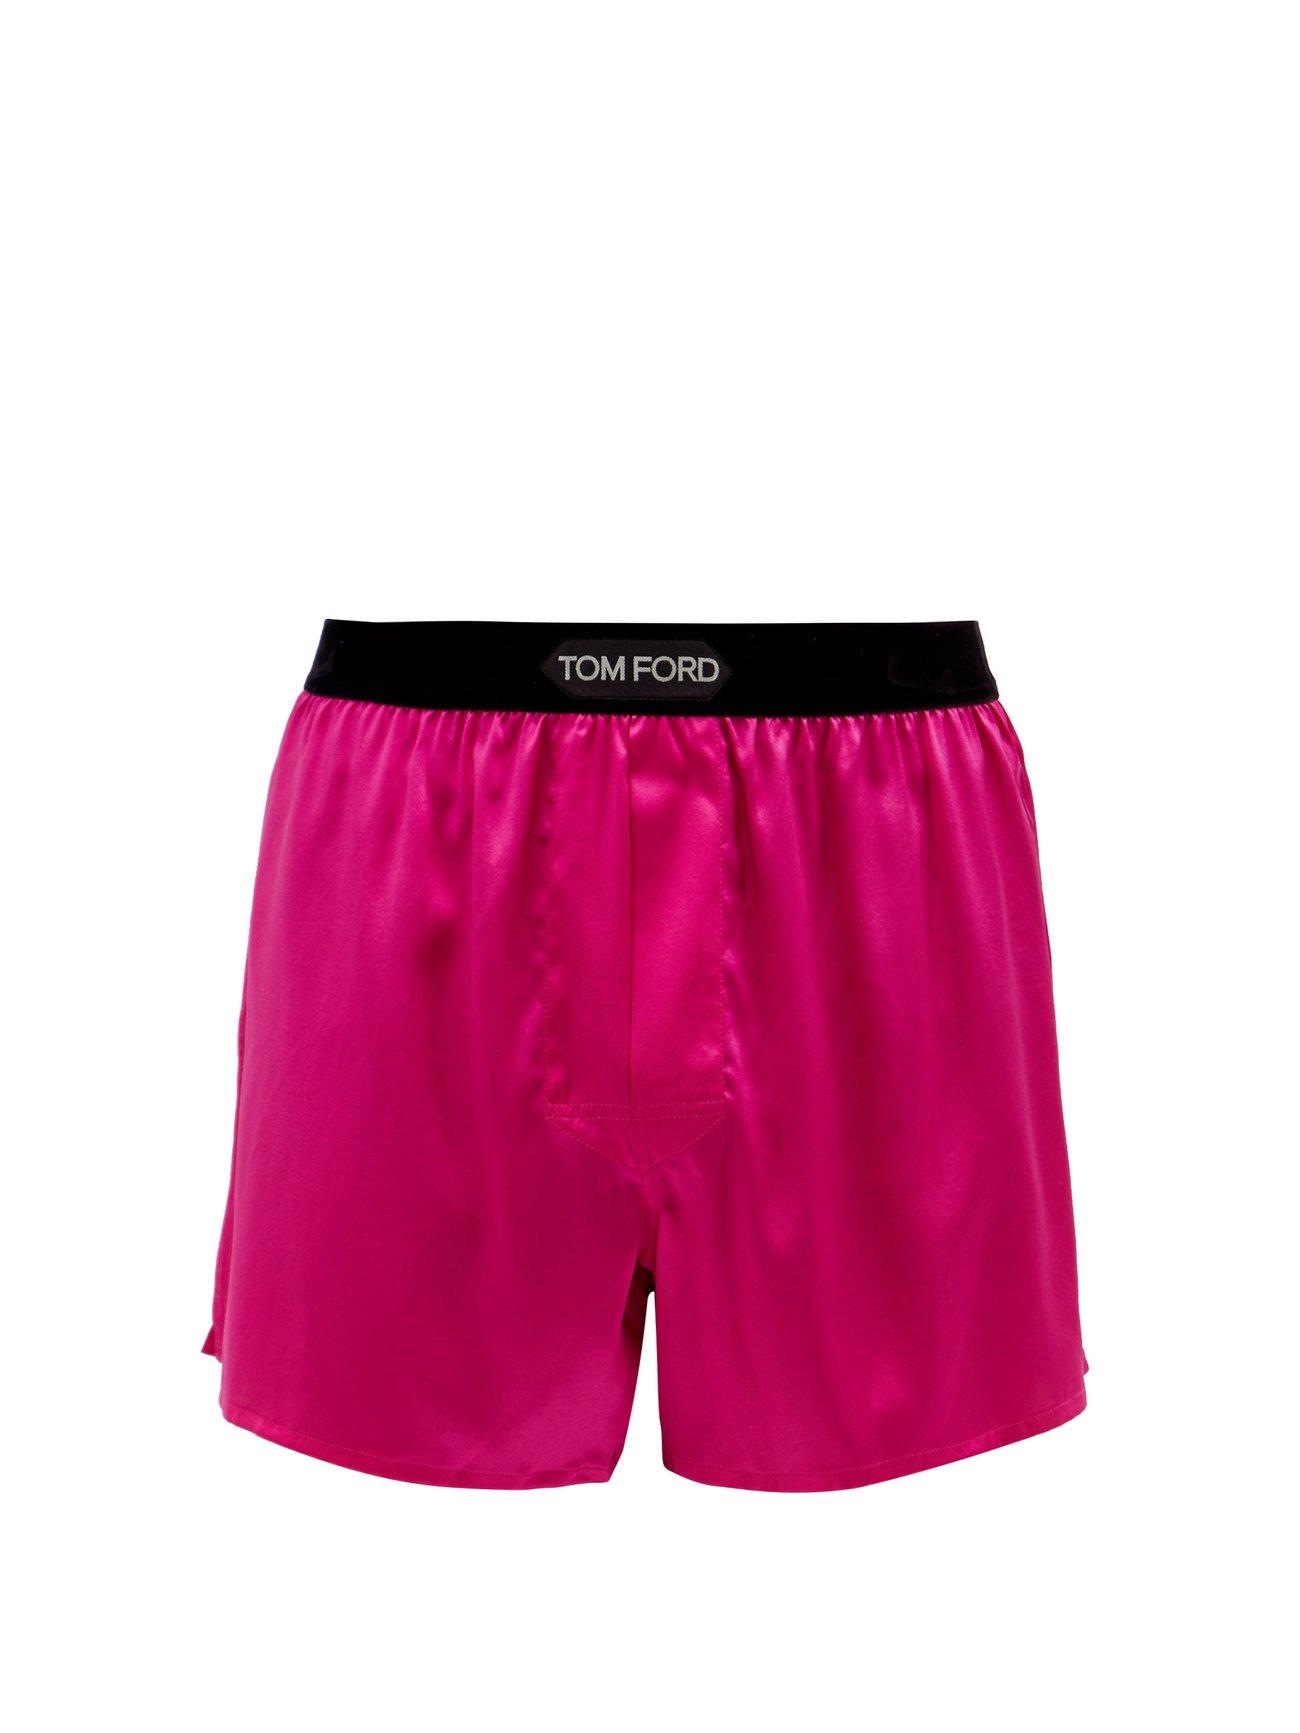 Cherry Short Boxers For Teenage Girls Safety Pink Pants S4X From